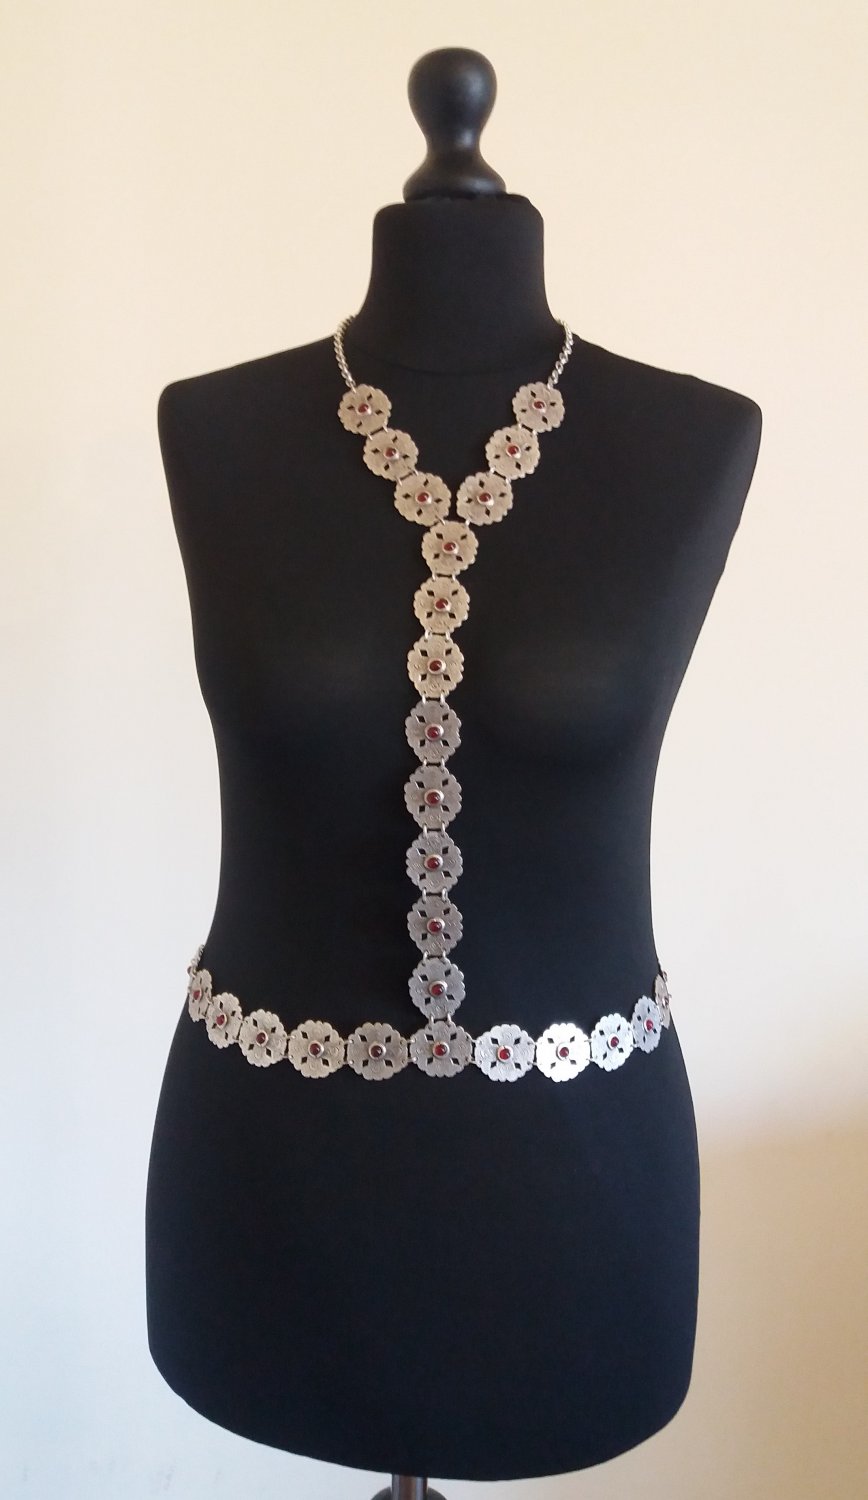 Armenian Body Harness Link with Pomegranate Seeds Stone, Ethnic Body Harness